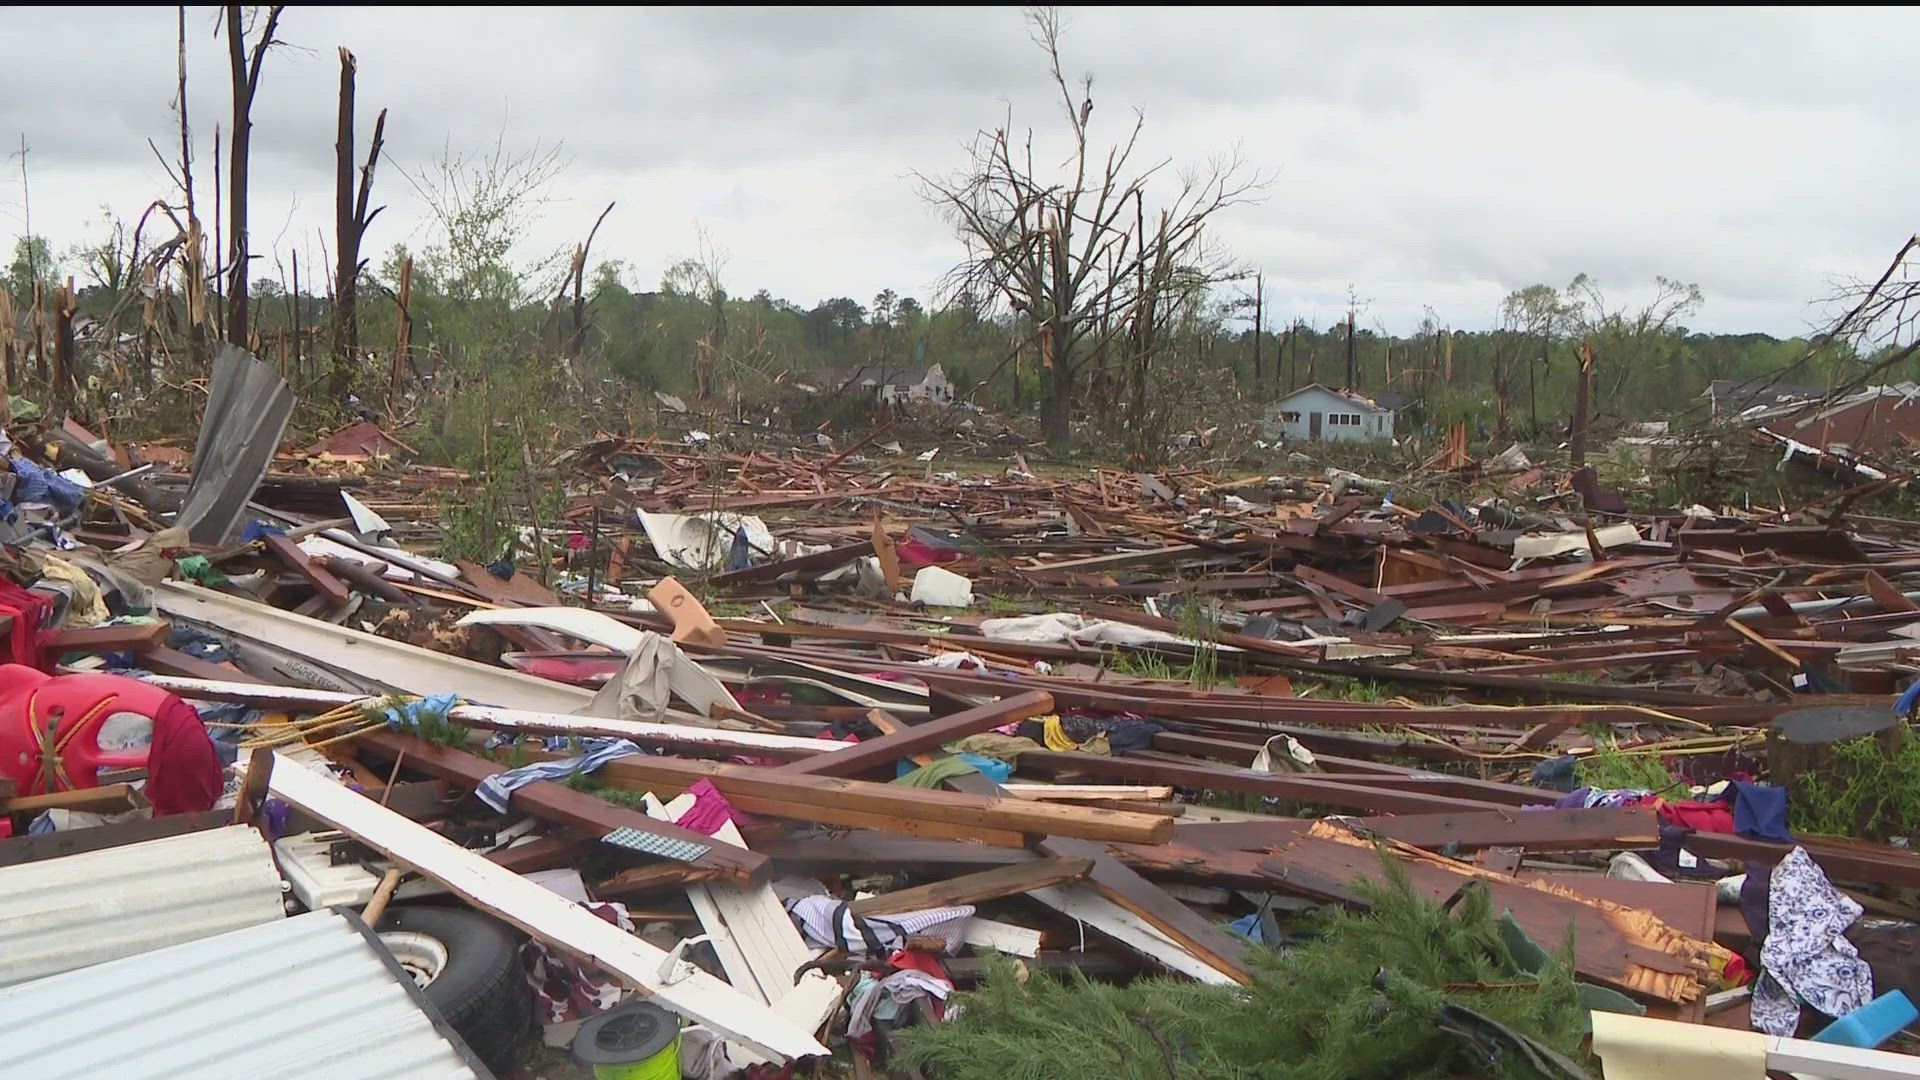 Recently, an EF-3 tornado hit Troup County destroying over 100 homes.